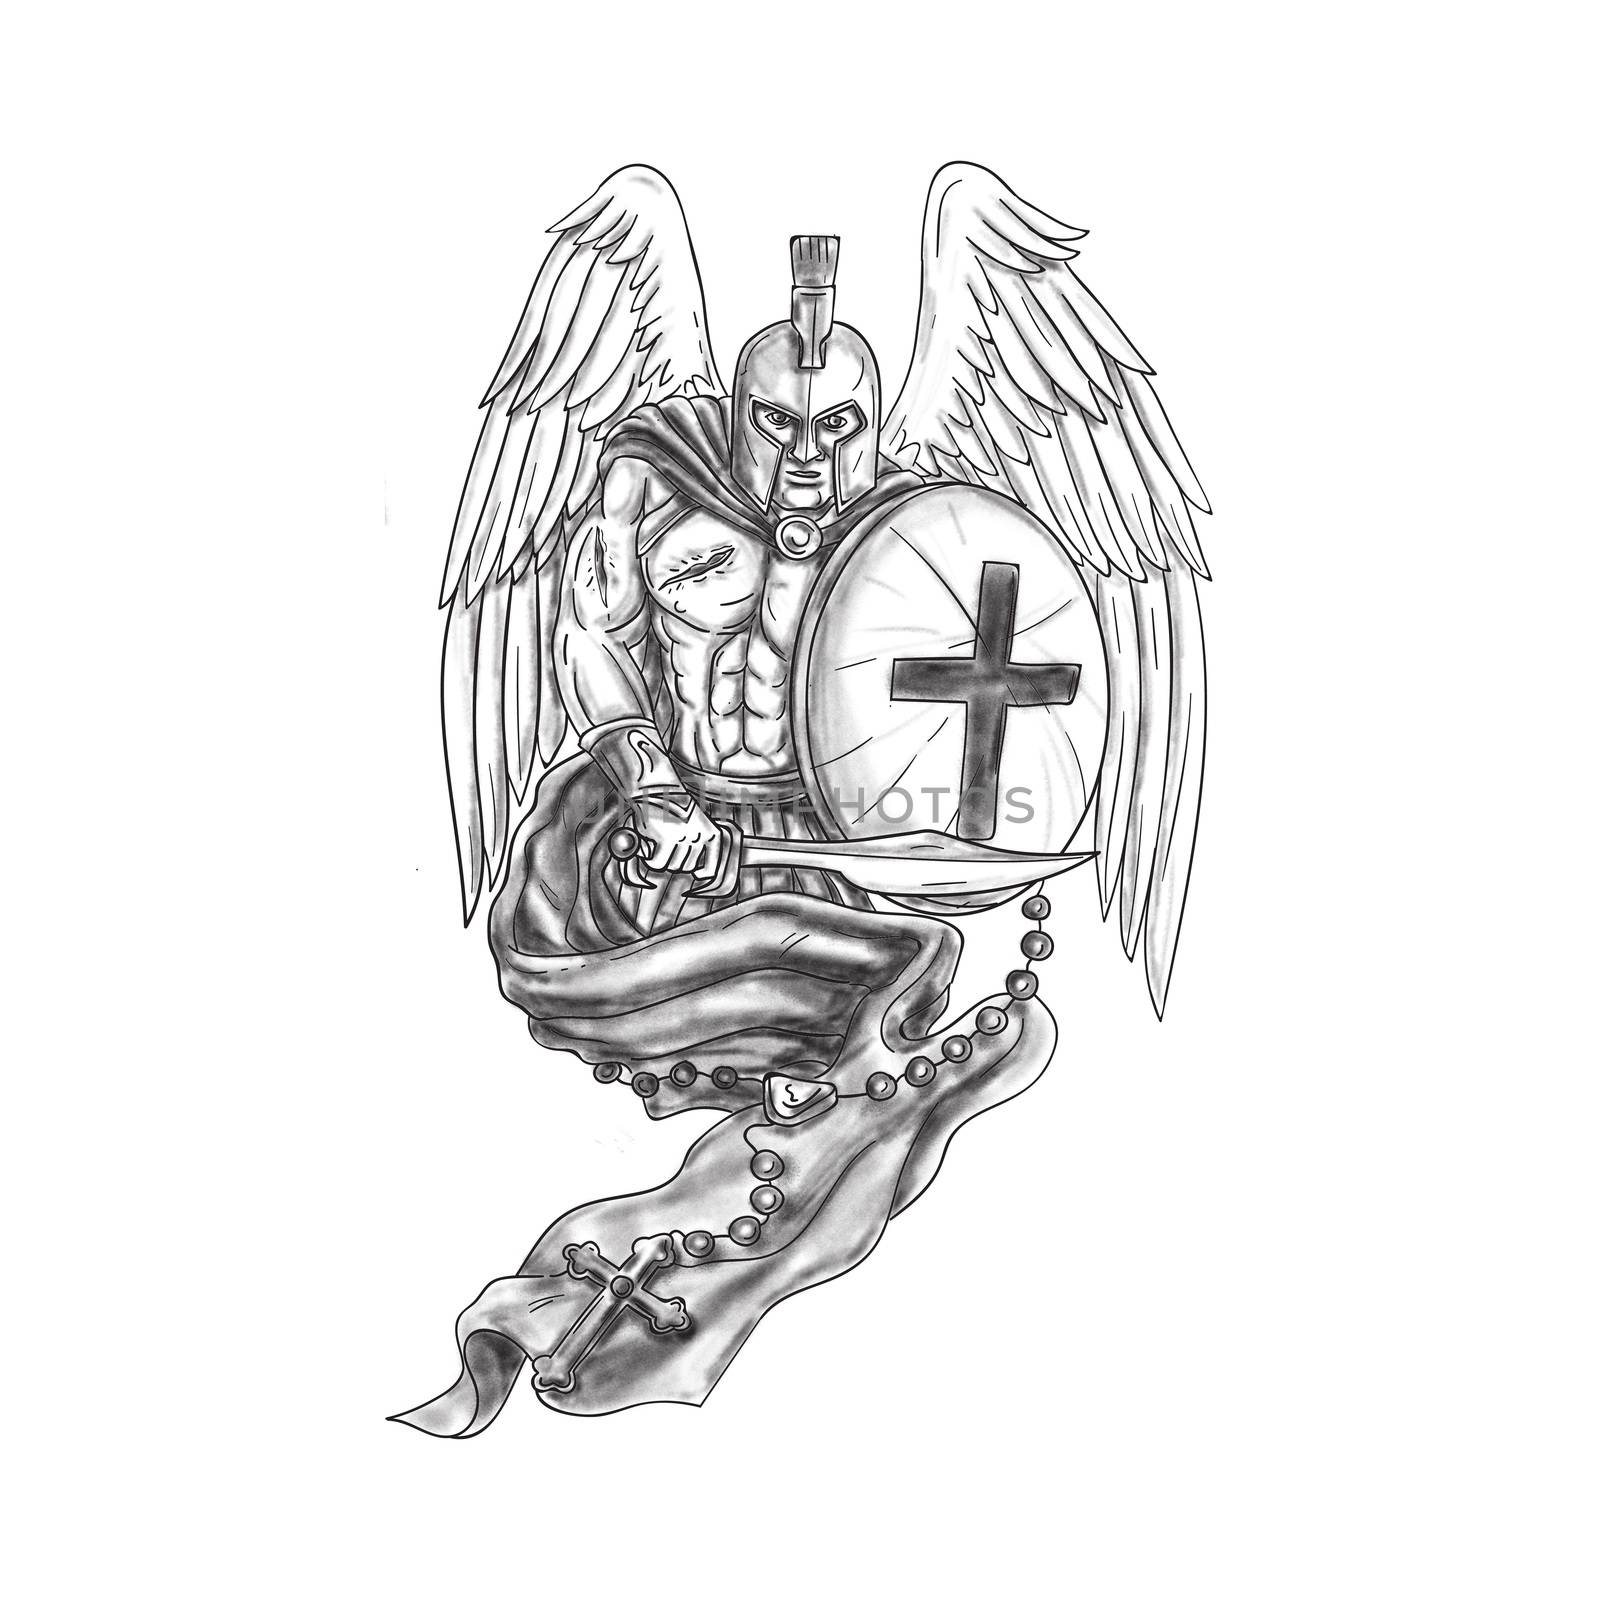 Tattoo style illustration of a wounded spartan warrior angel wearing helmet holding sword and shield draped with rosary viewed from front set on isolated white background.